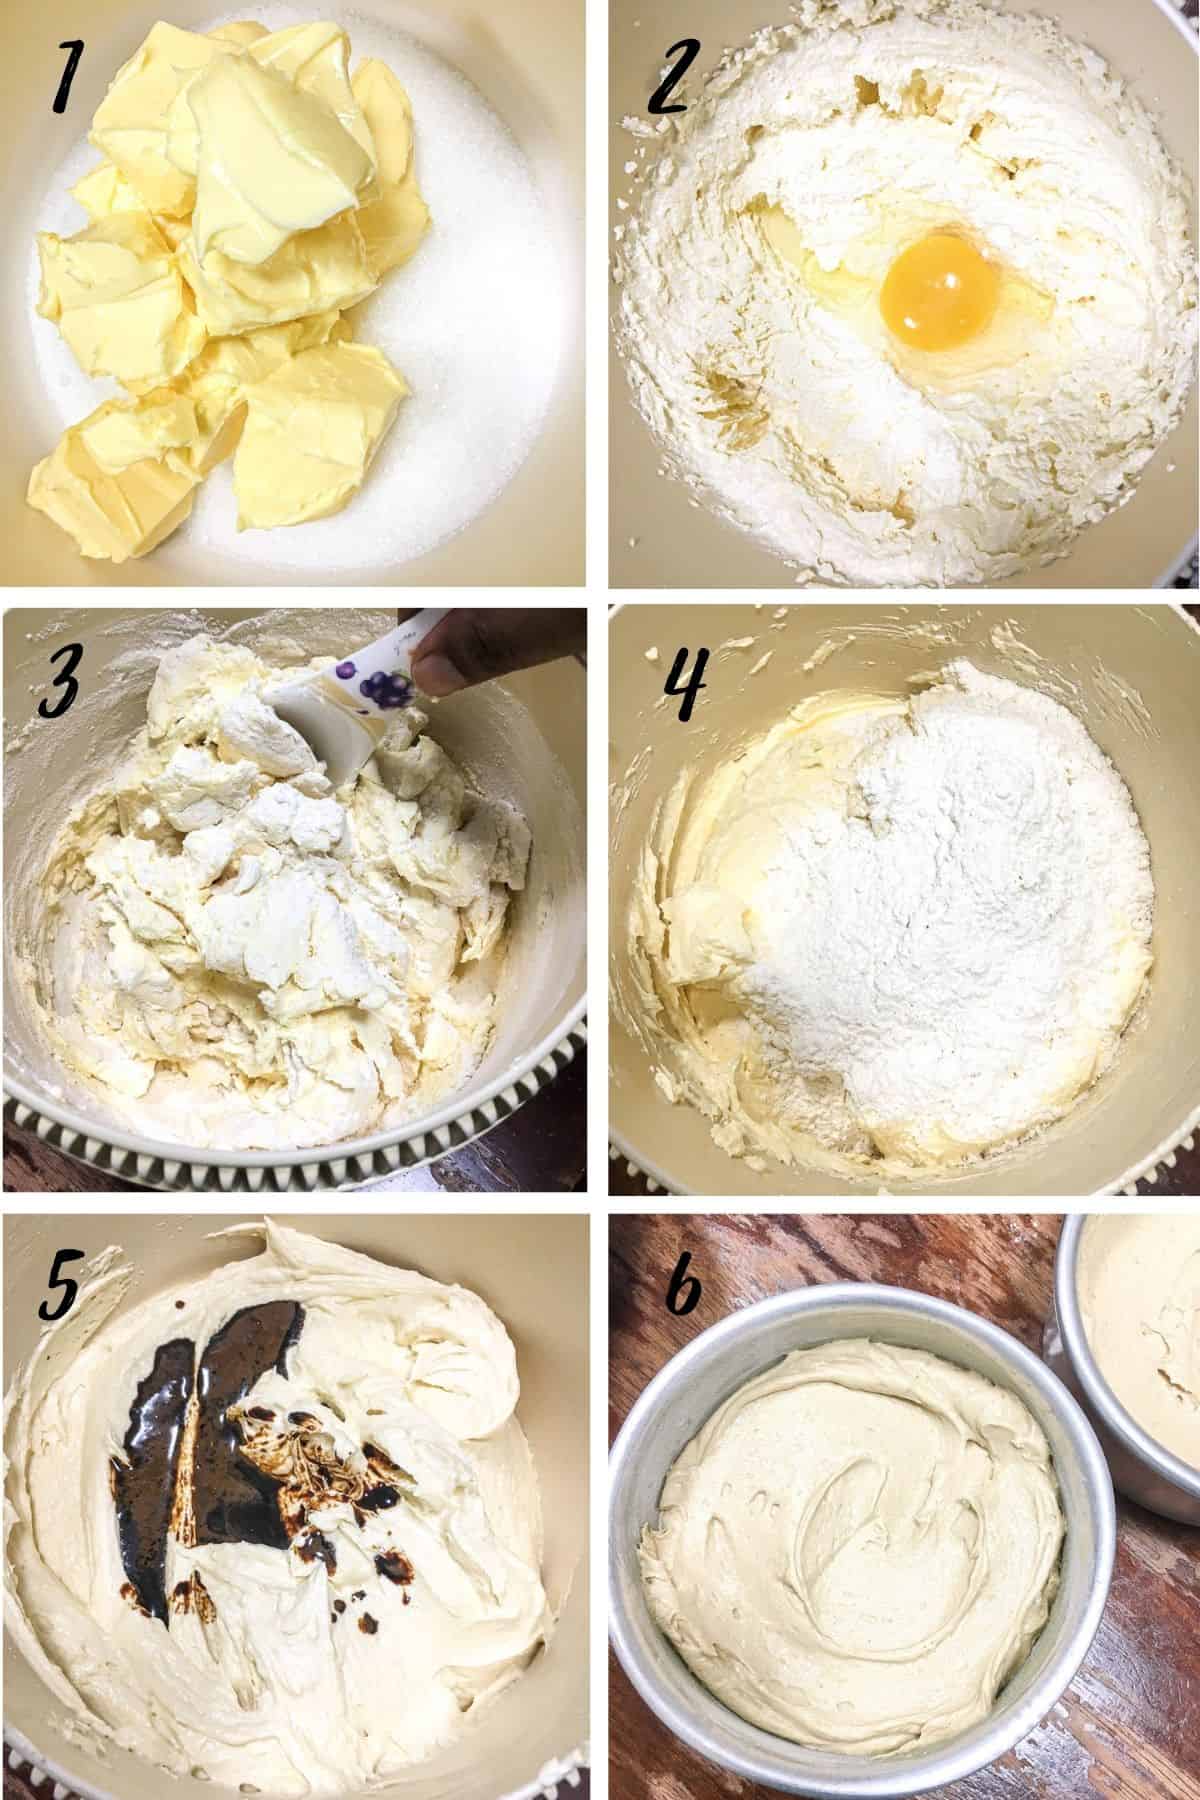 A poster of 6 images showing how to mix coffee cake batter.